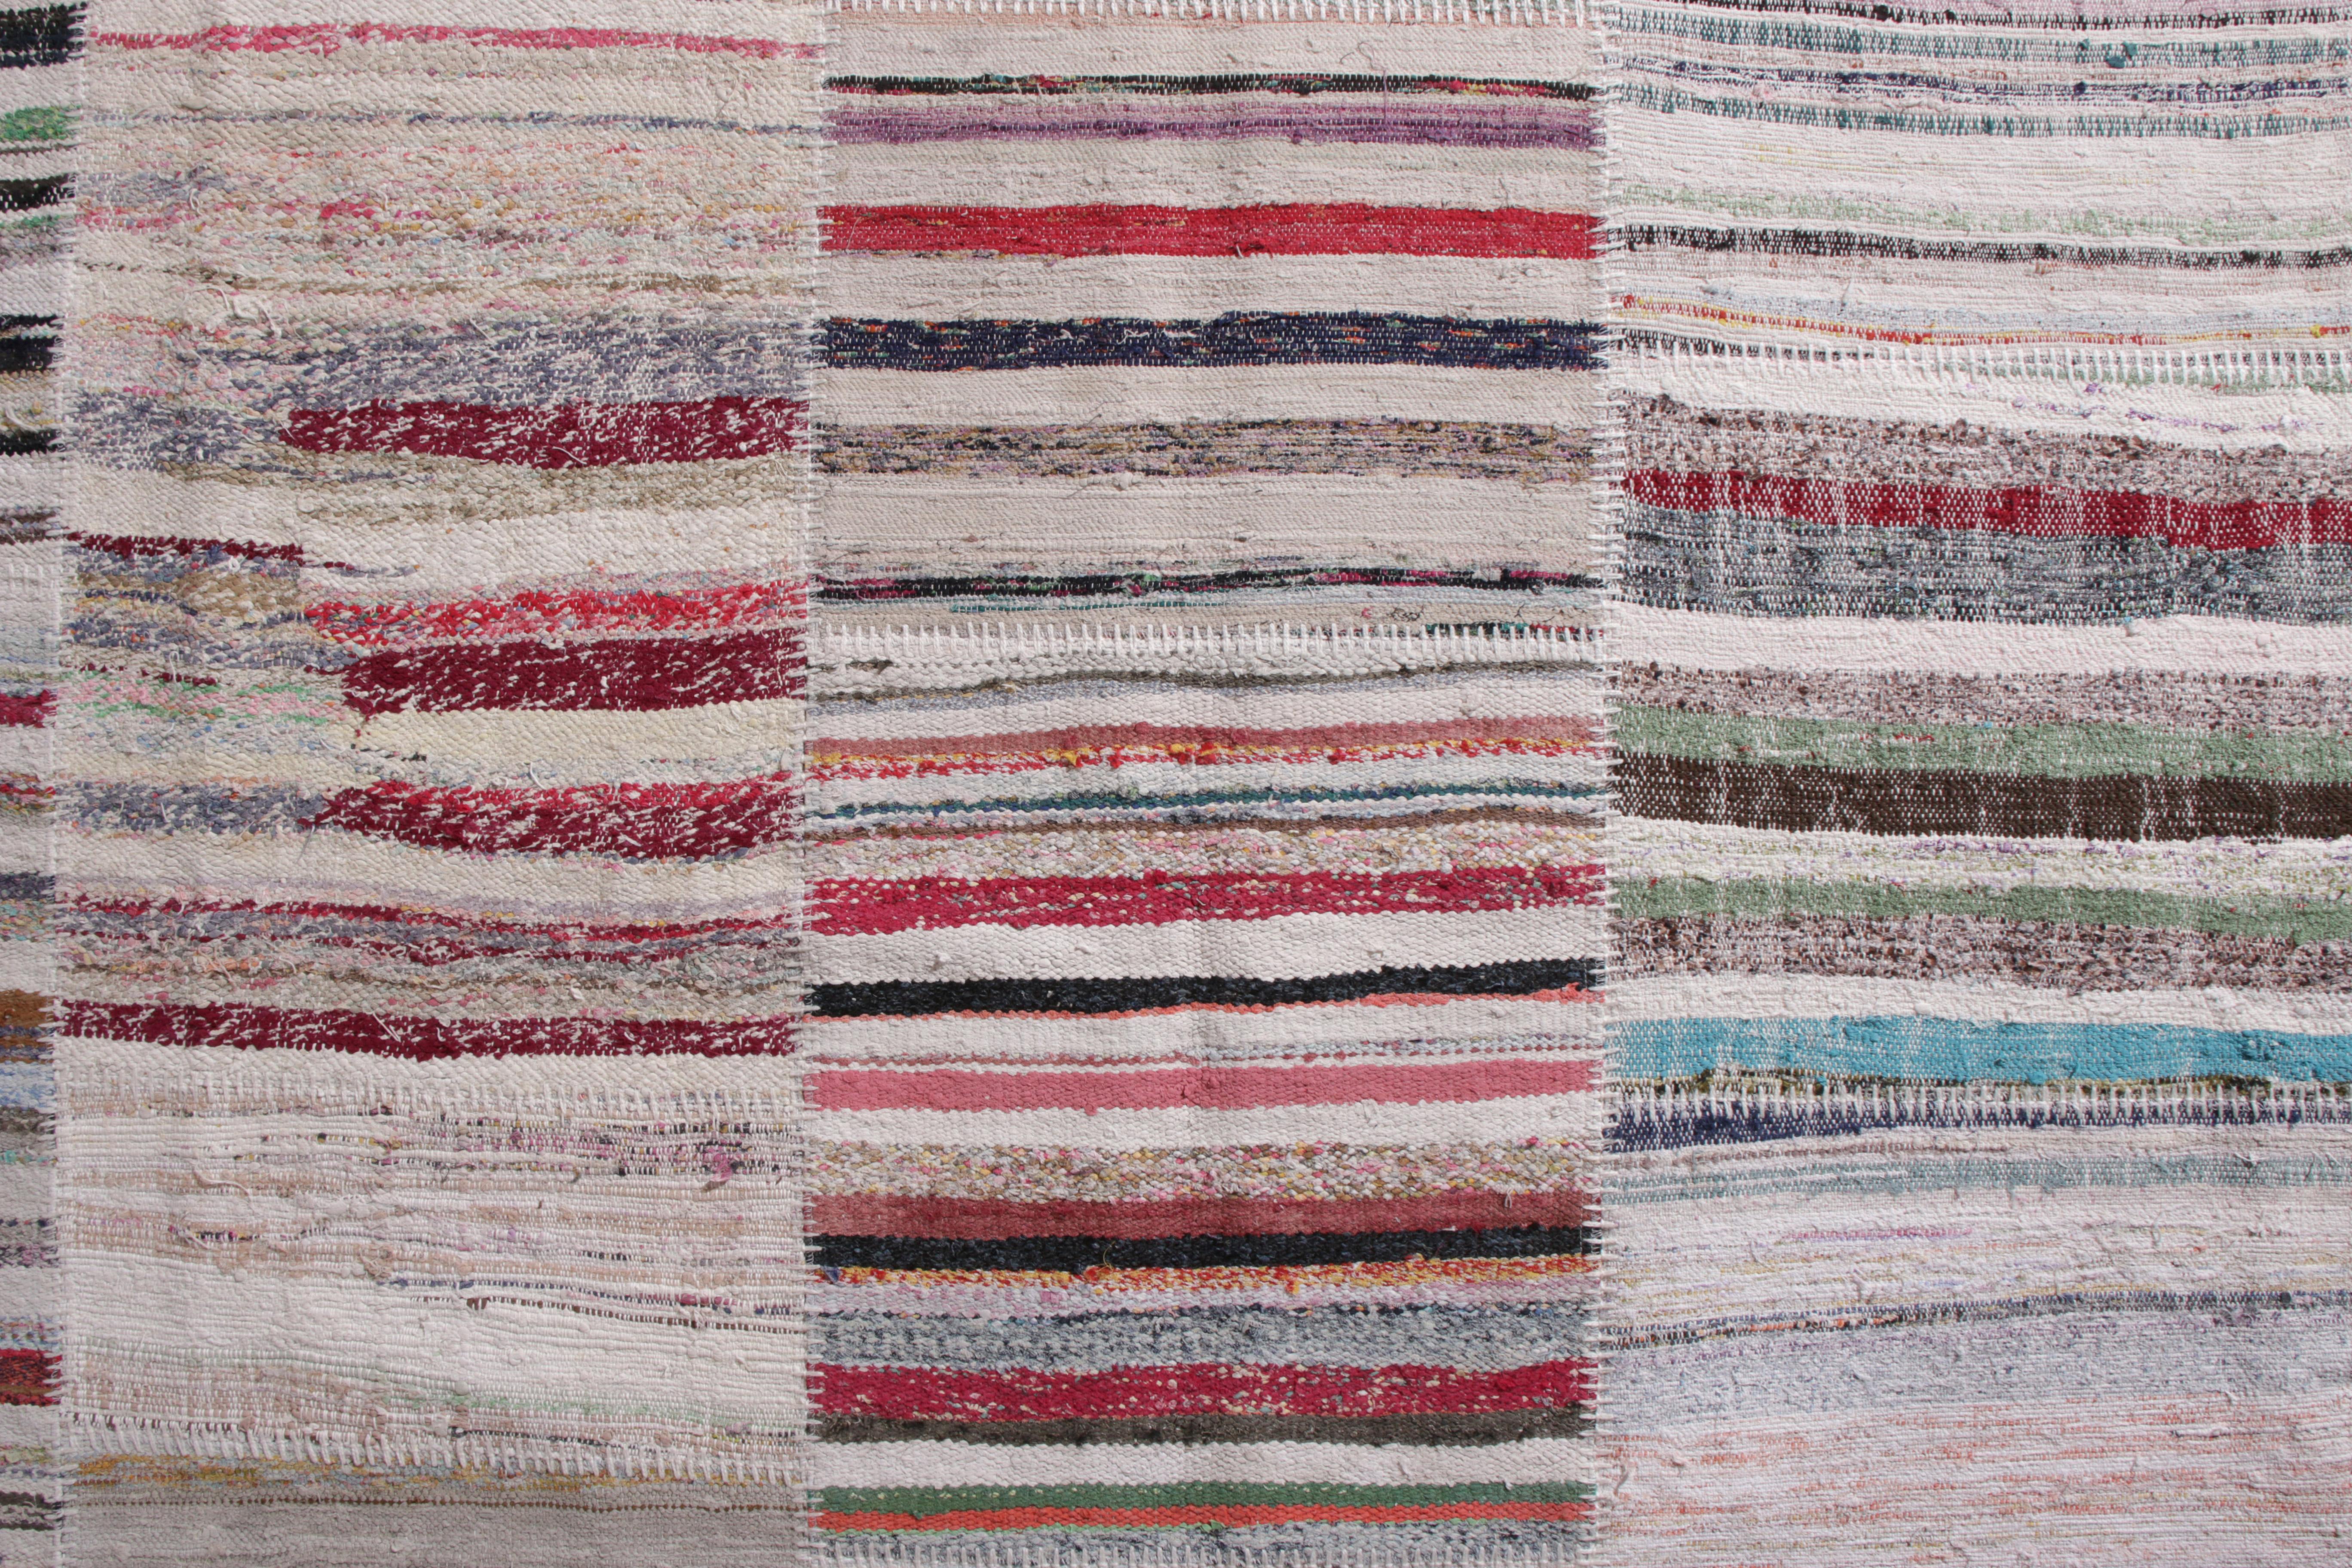 Rug & Kilim's Modern Patchwork Kilim Rug in Gray Multicolor Stripe Pattern In New Condition For Sale In Long Island City, NY